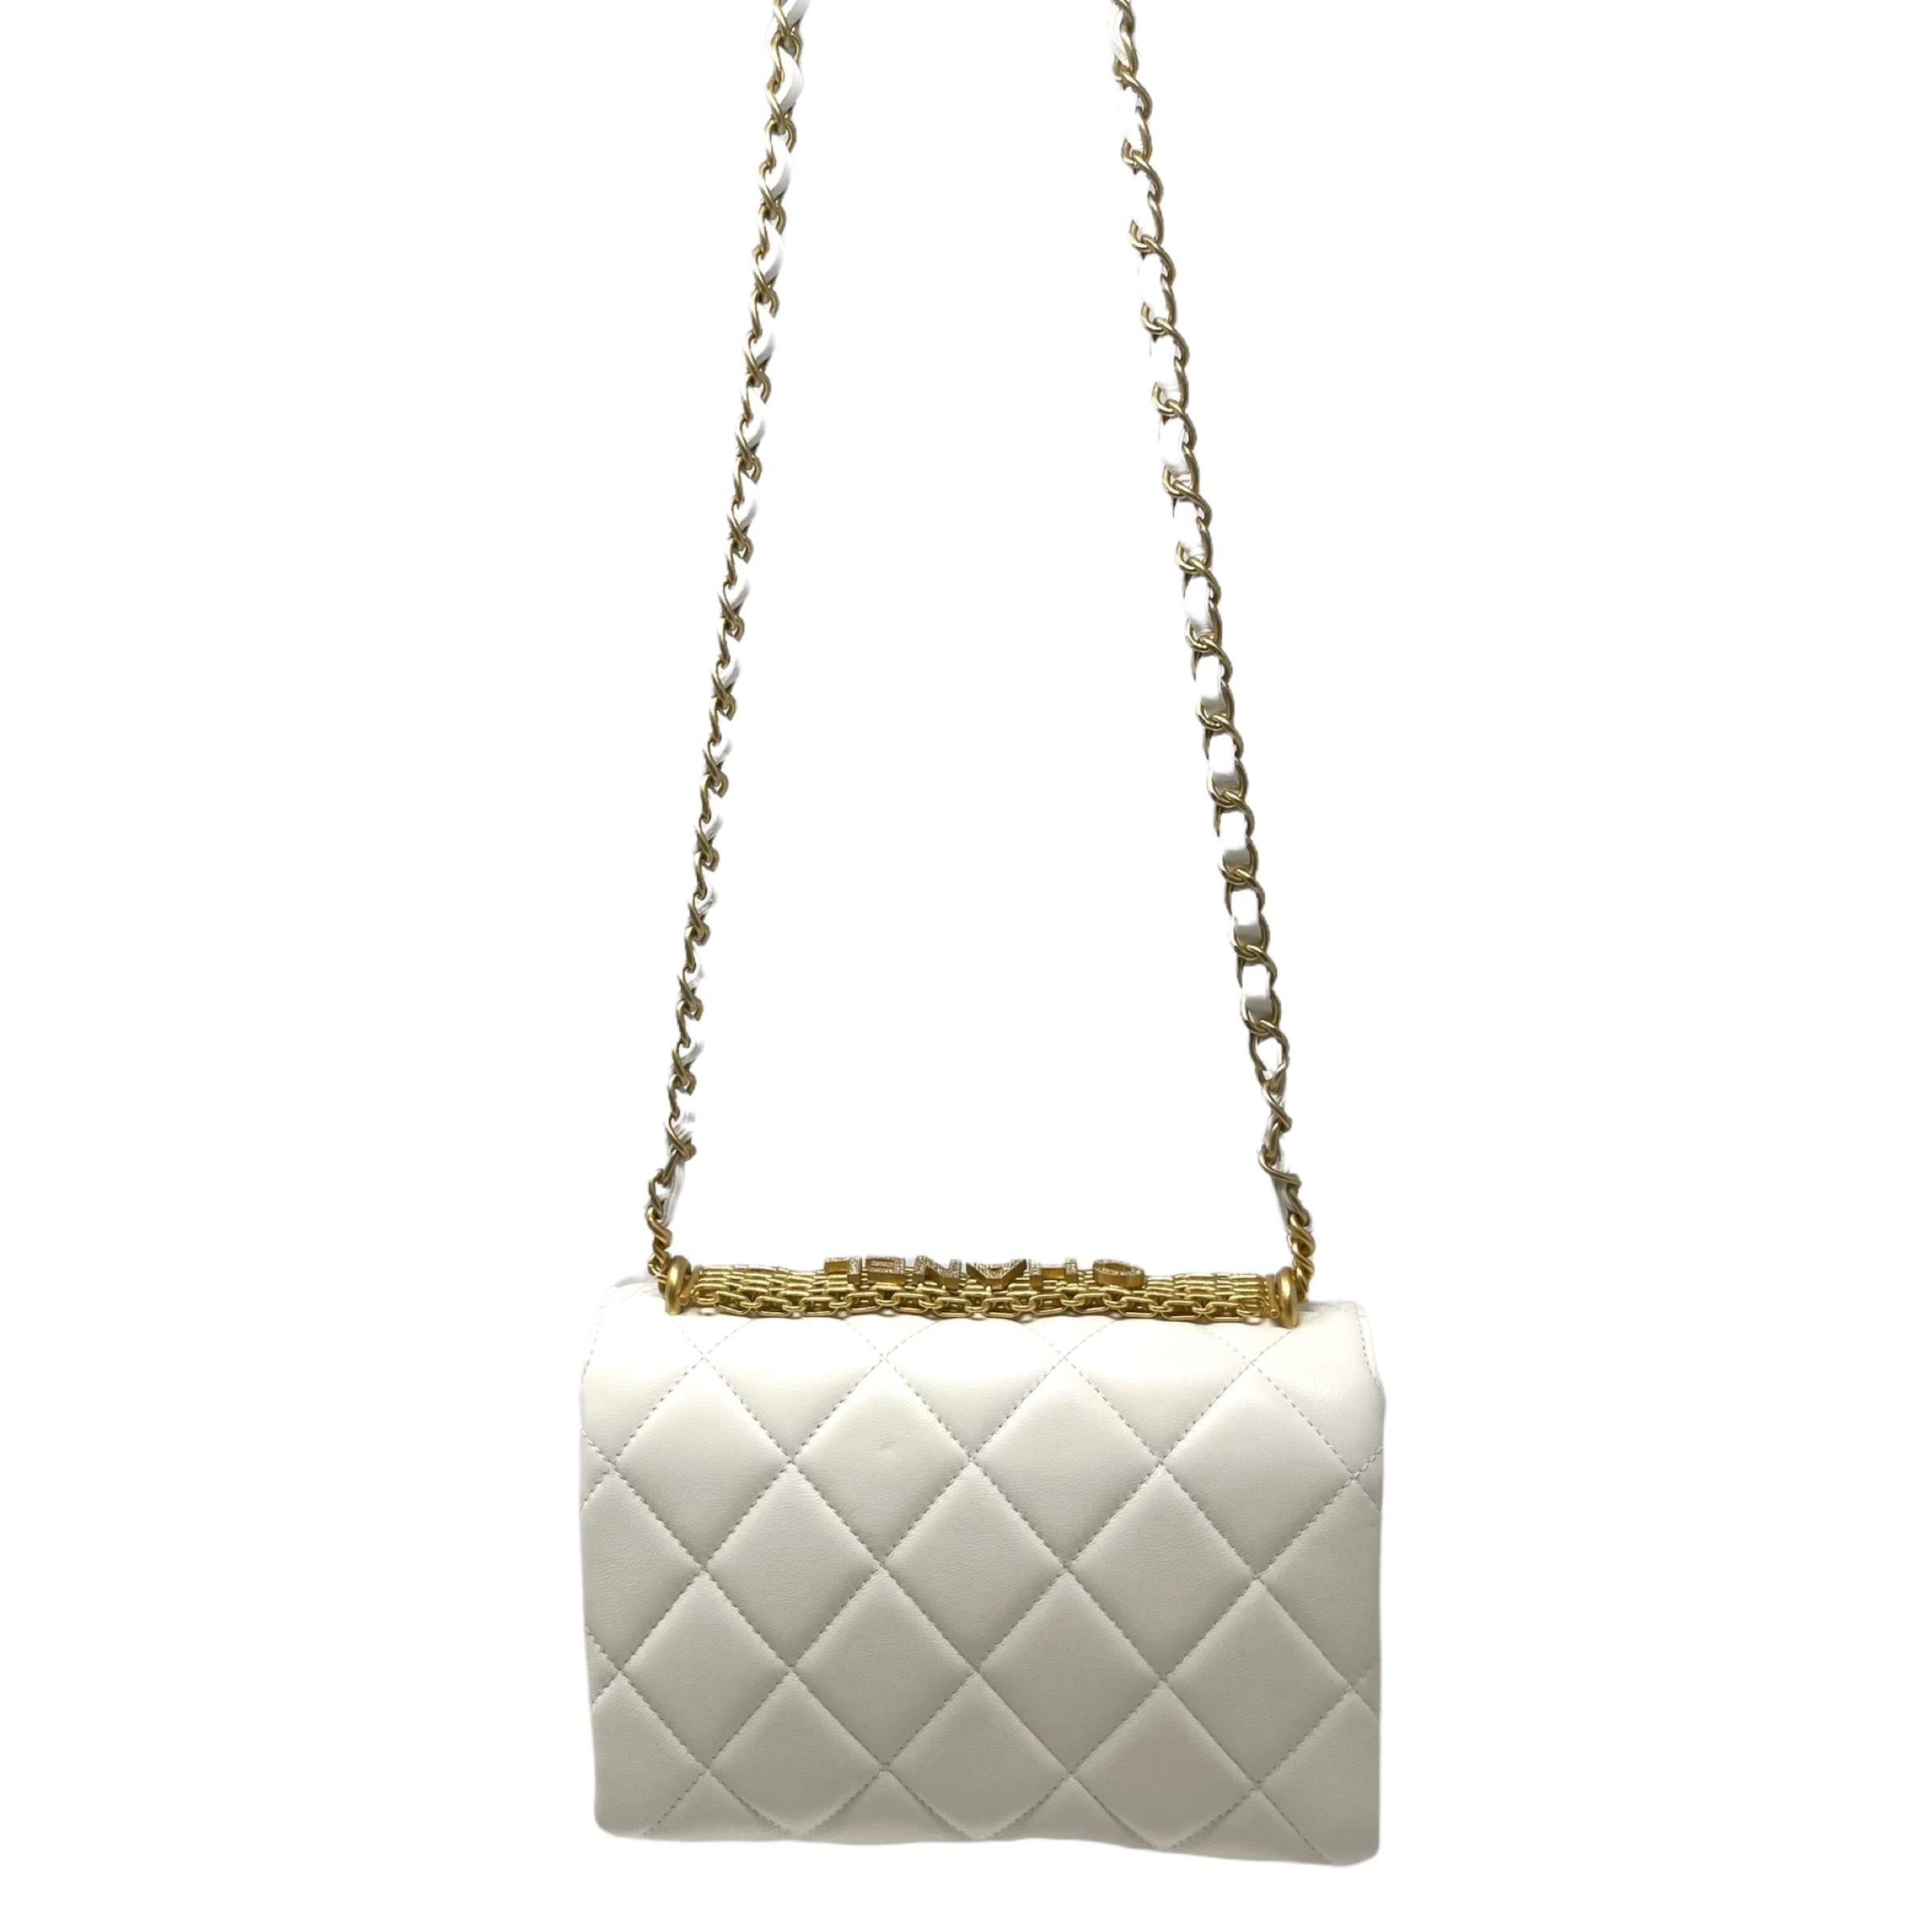 NEW Chanel White Small Flap Bag Quilted Leather Crossbody Bag For Sale 6